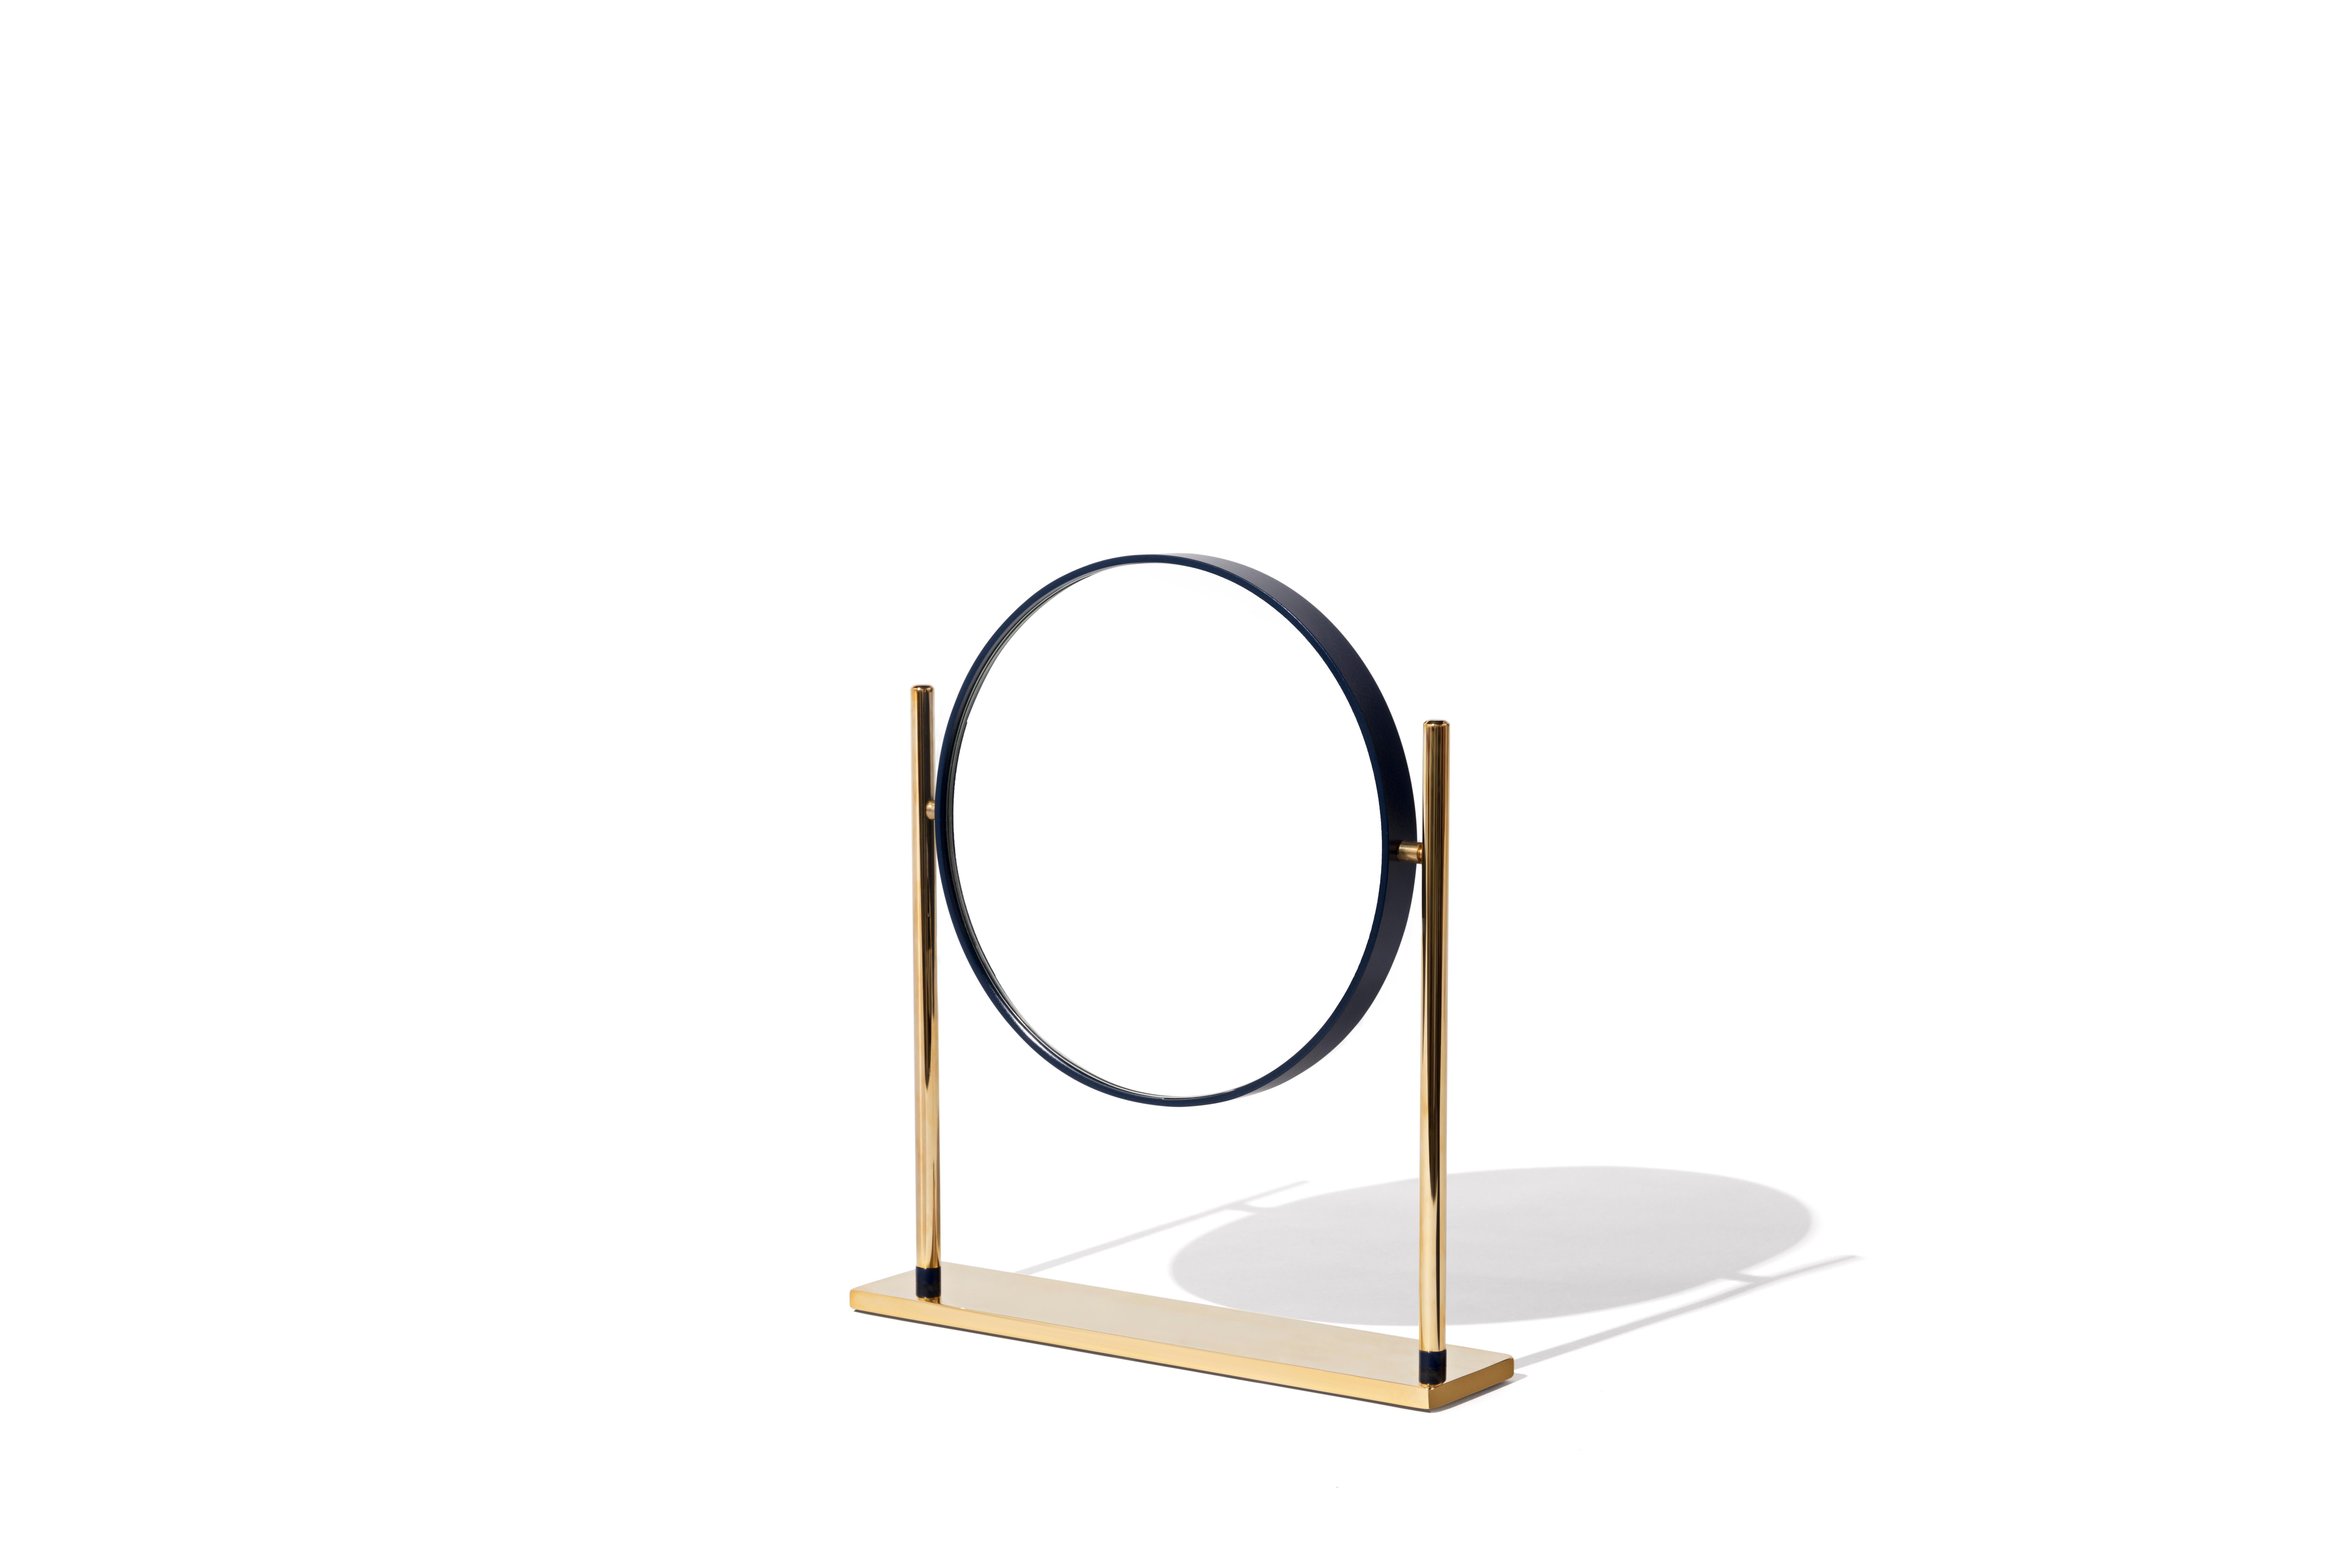 Mirrò mirror by Mingardo
Dimensions: D 26 x W 6 x H 32 cm 
Materials: Iron and natural brass, mirror
Weight: 4 kg

Also available in different finishes. 

Mirrò is a small desktop and bathroom mirror, a precious linear object that displays